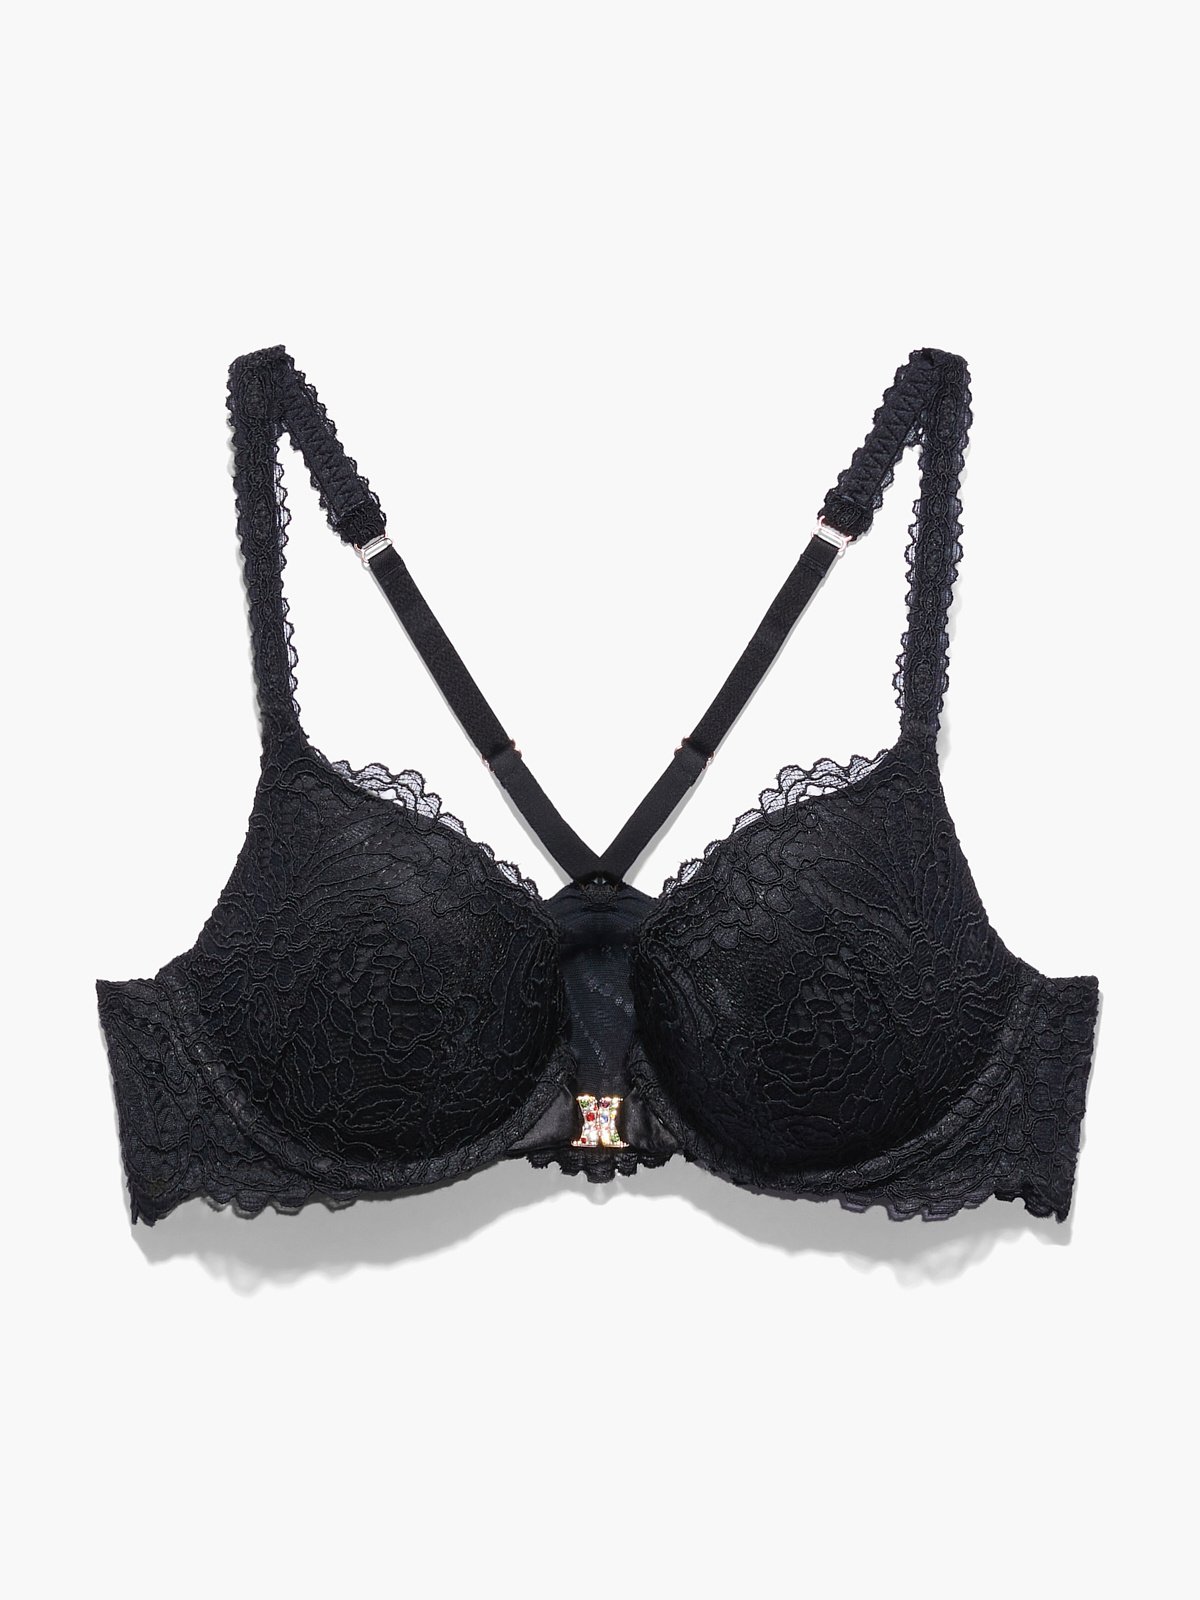 dawie slabbert recommends How To Undo Front Clasp Bras